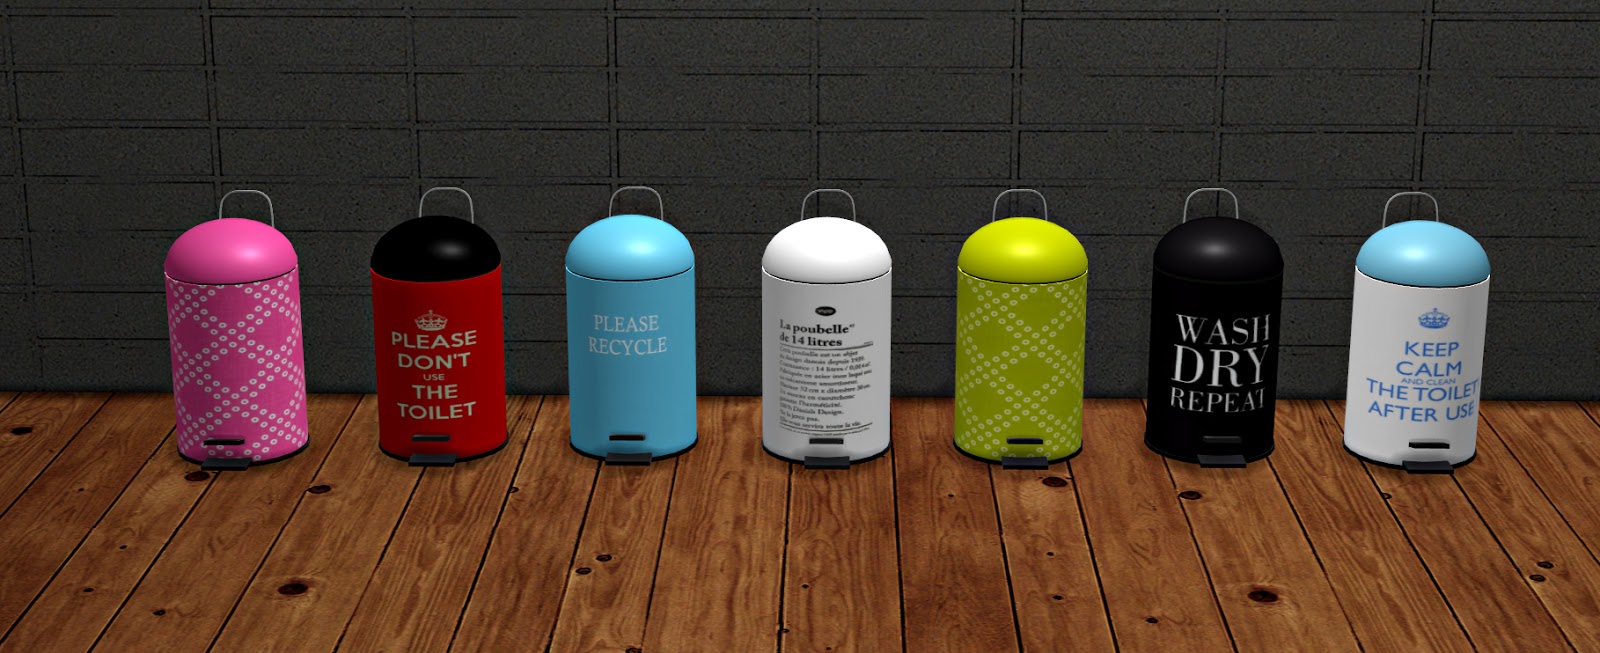 is nano trash can automatically used in sims 4